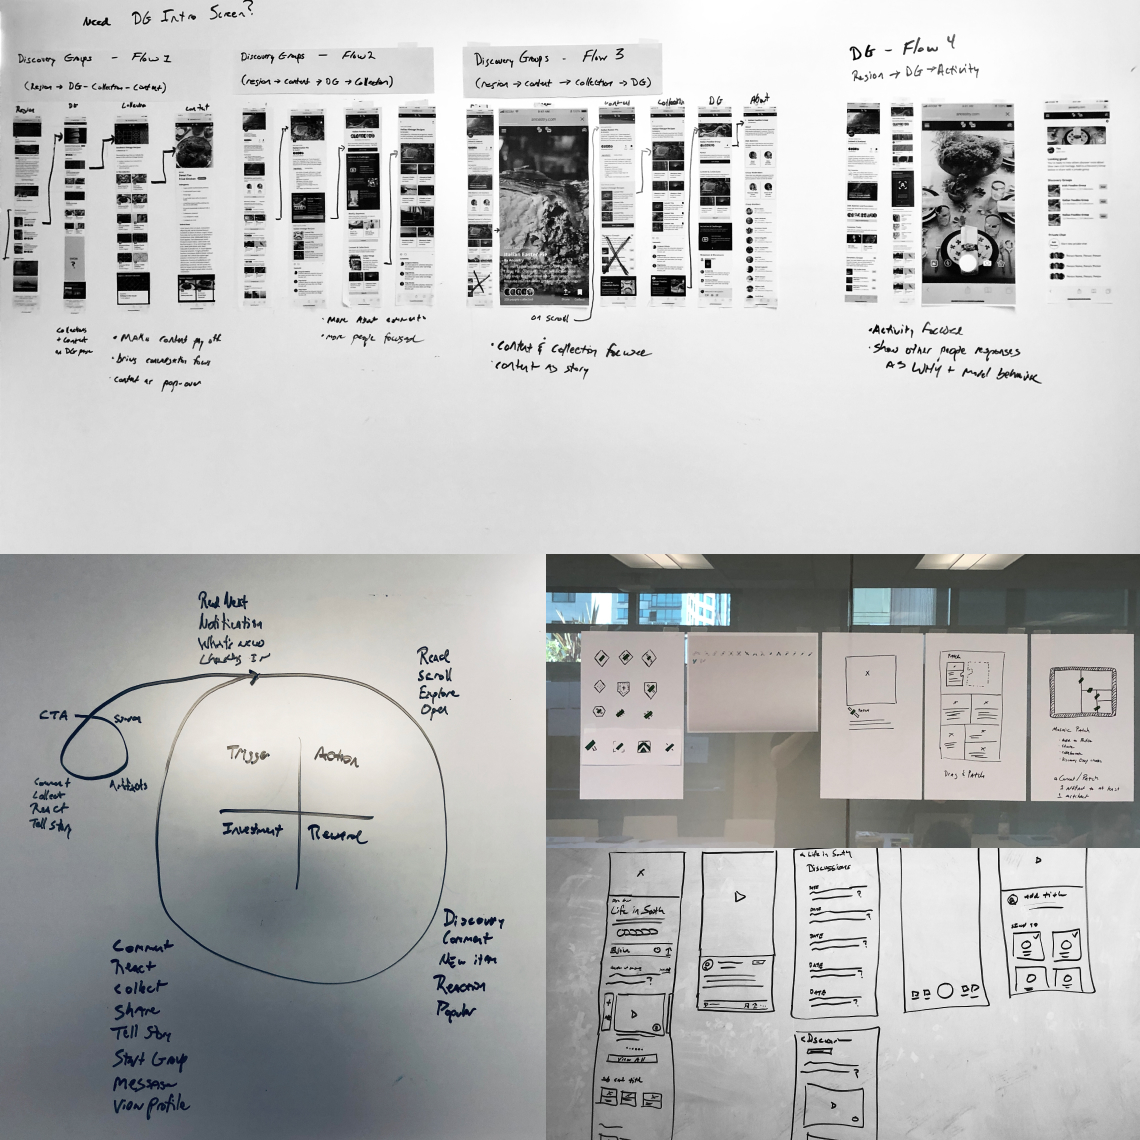 Showing the process of designing Ancestry Mosaic with whiteboards and sketches